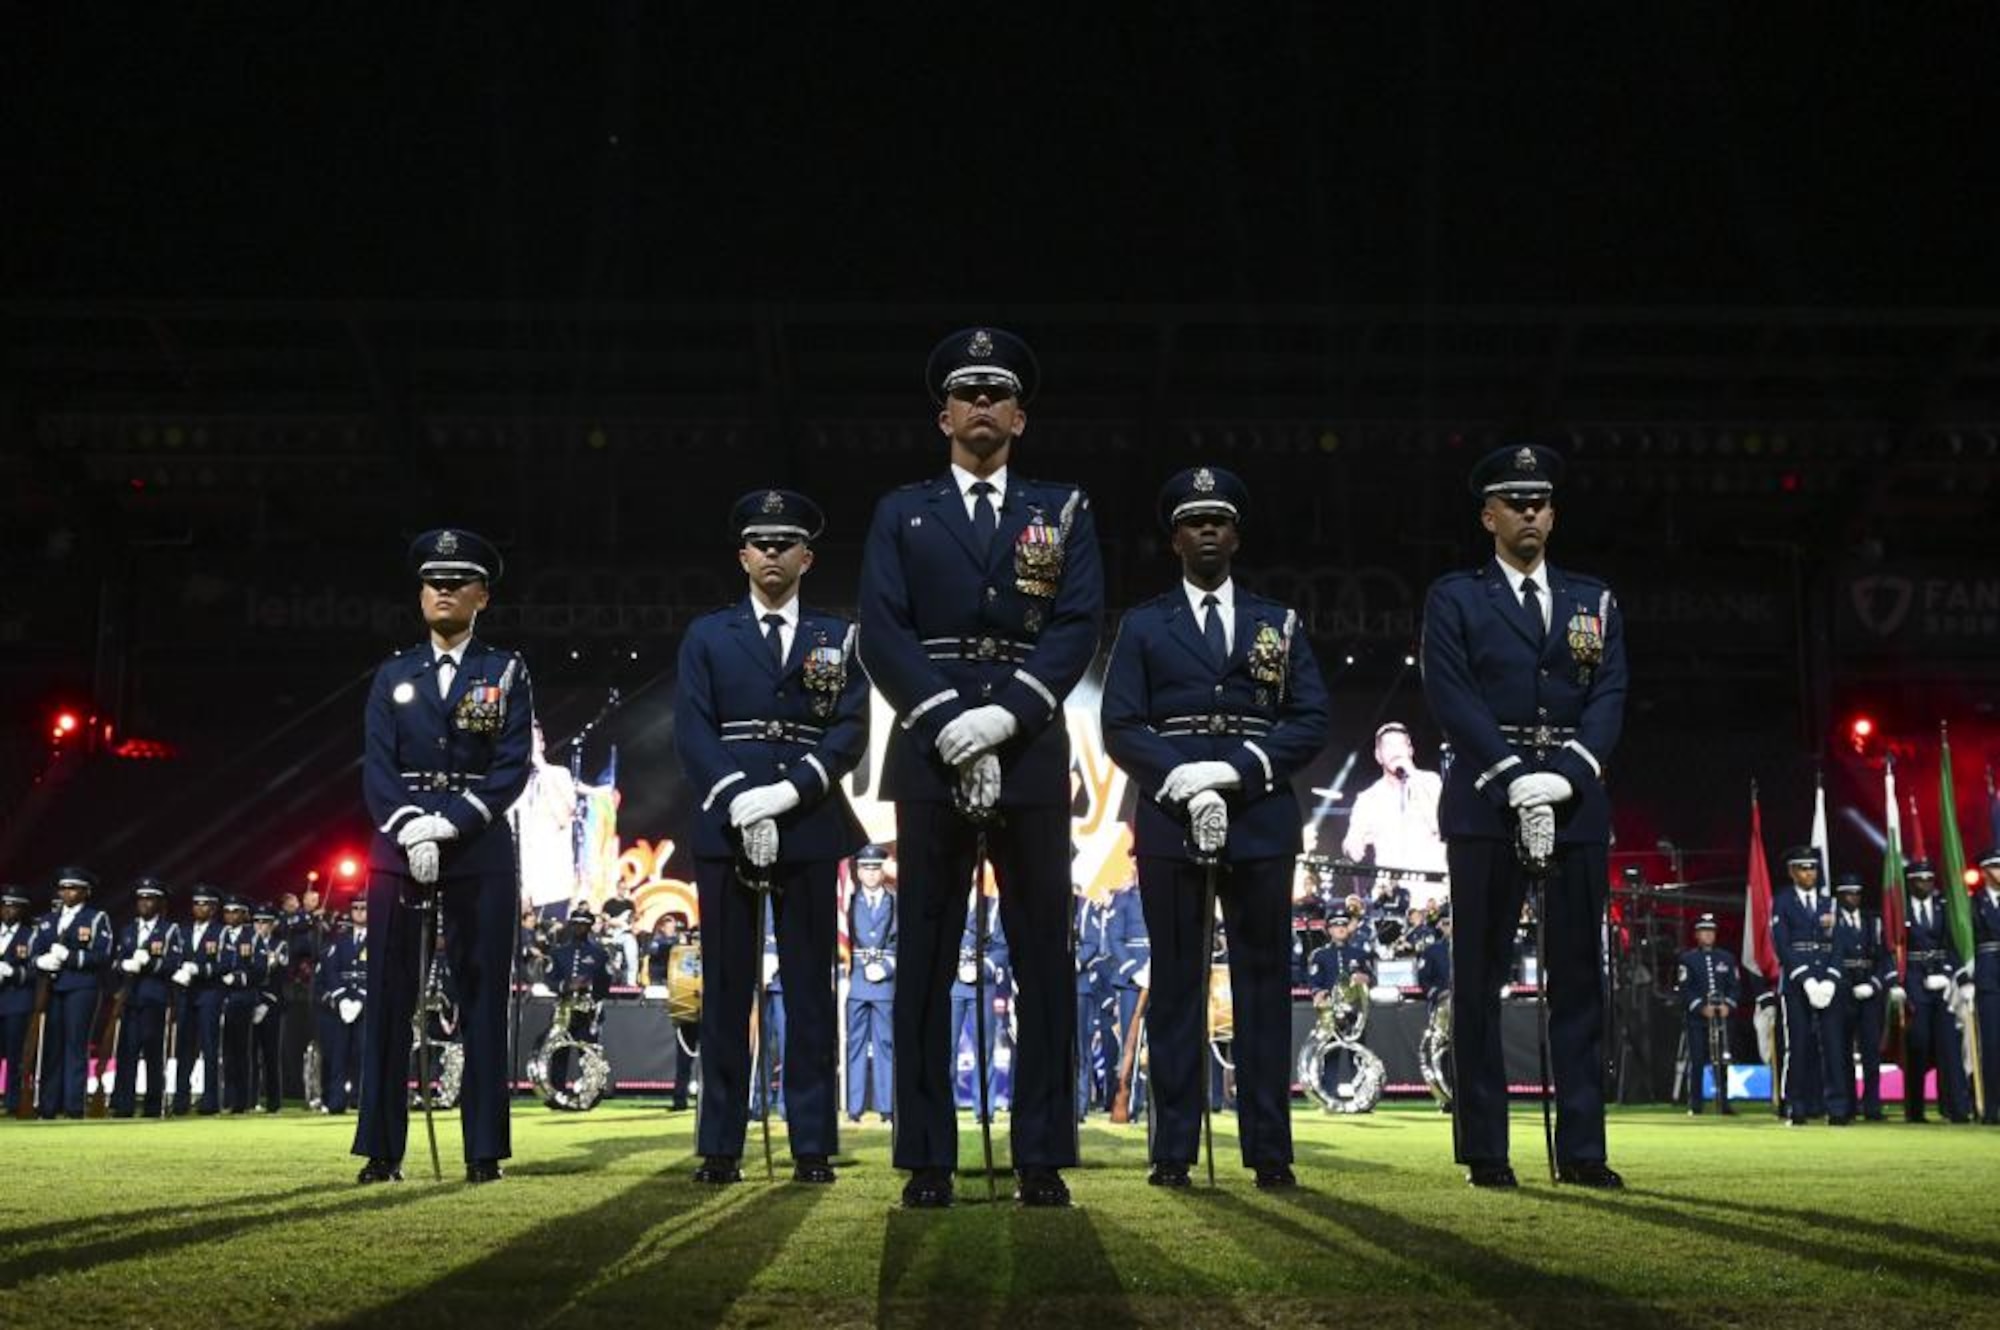 The United States Air Force Band and The United States Air Force Honor Guard Drill Team gather in formation during a performance for the Air Force 75th Anniversary Tattoo Sept. 15, 2022, at Audi Field, Washington, D.C. The military Tattoo is an historic tradition held worldwide, showcasing the excellence and readiness of service members. The members of the Band and the Honor Guard share a common mission of representing Air Force values and fostering community across the nation and with international allies. (U.S. Air Force photo by Amn Bill Guilliam)